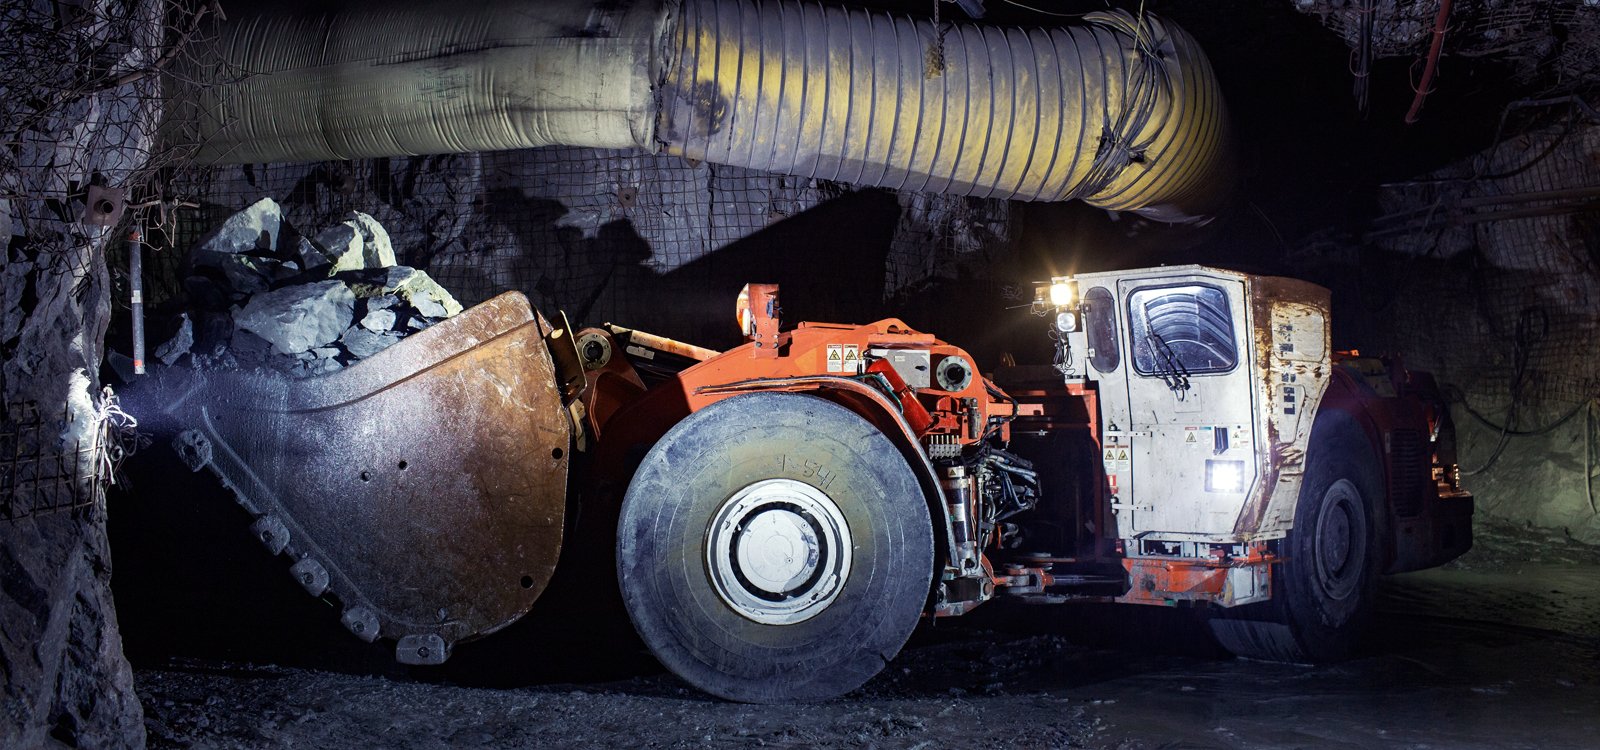 A Sandvik LH514 loader equipped with AutoMine enables Lac des Iles to muck between shifts.